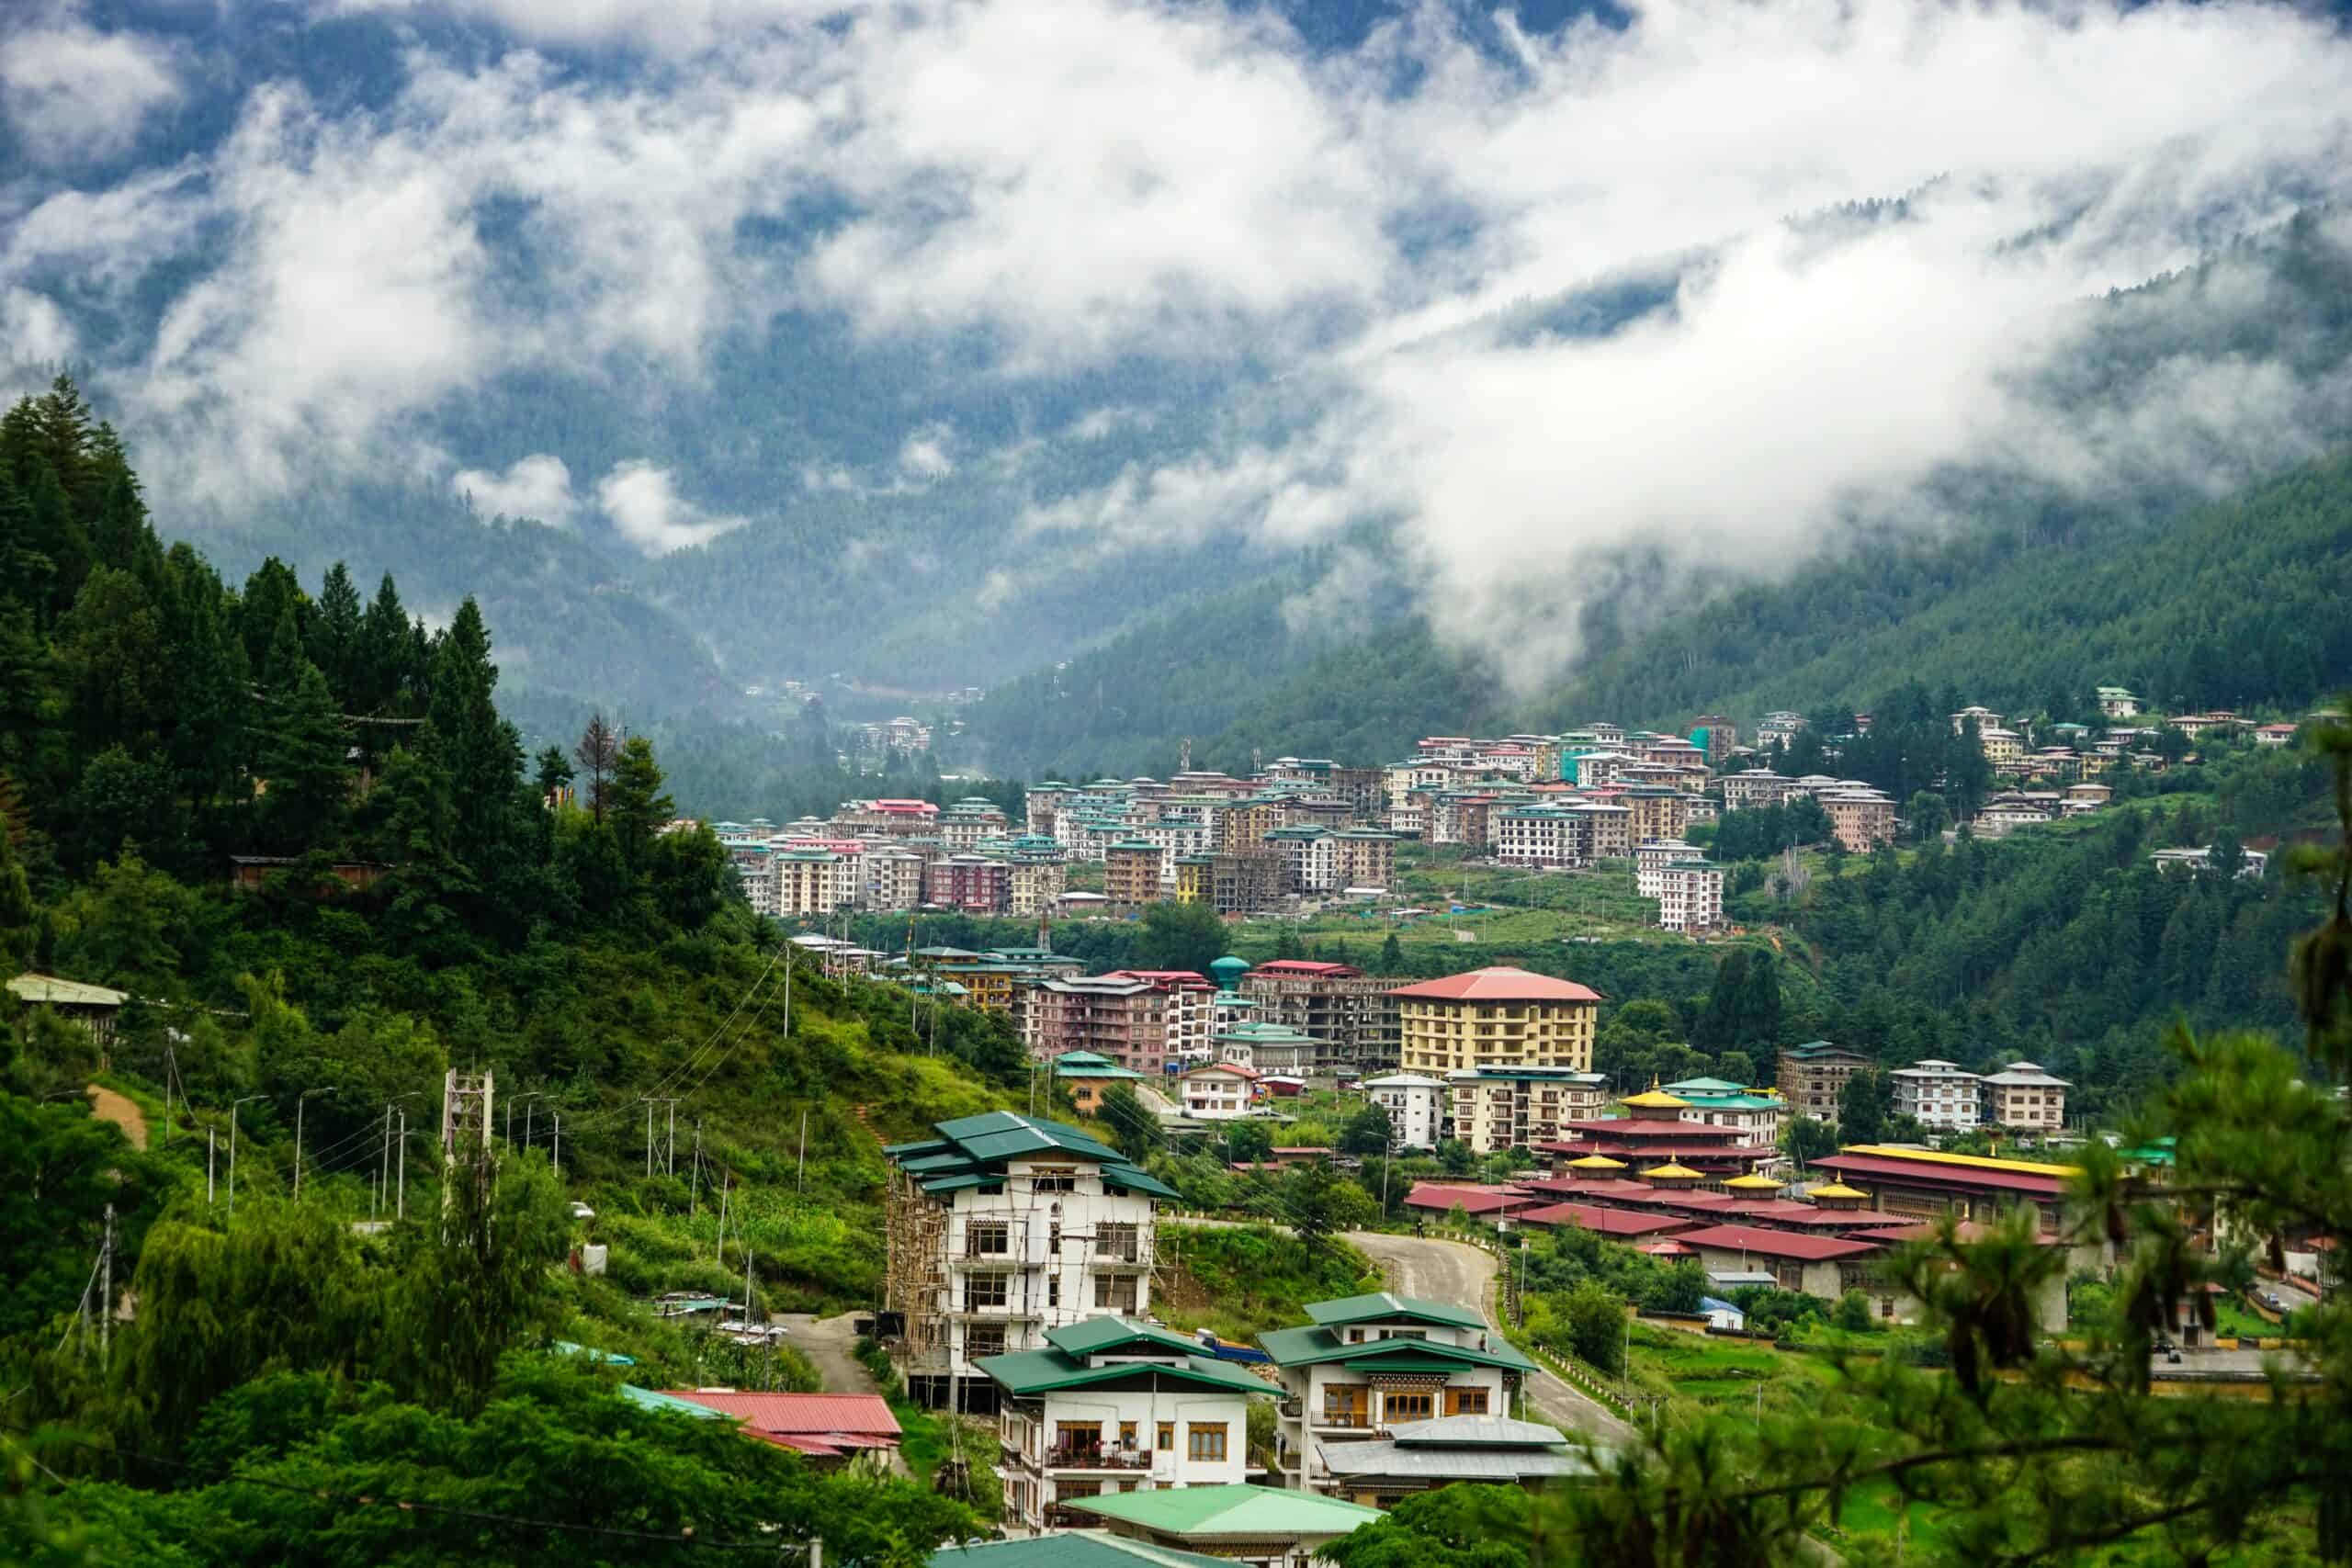 The Himalayan kingdom of Bhutan confirms it has been mining Bitcoin for years